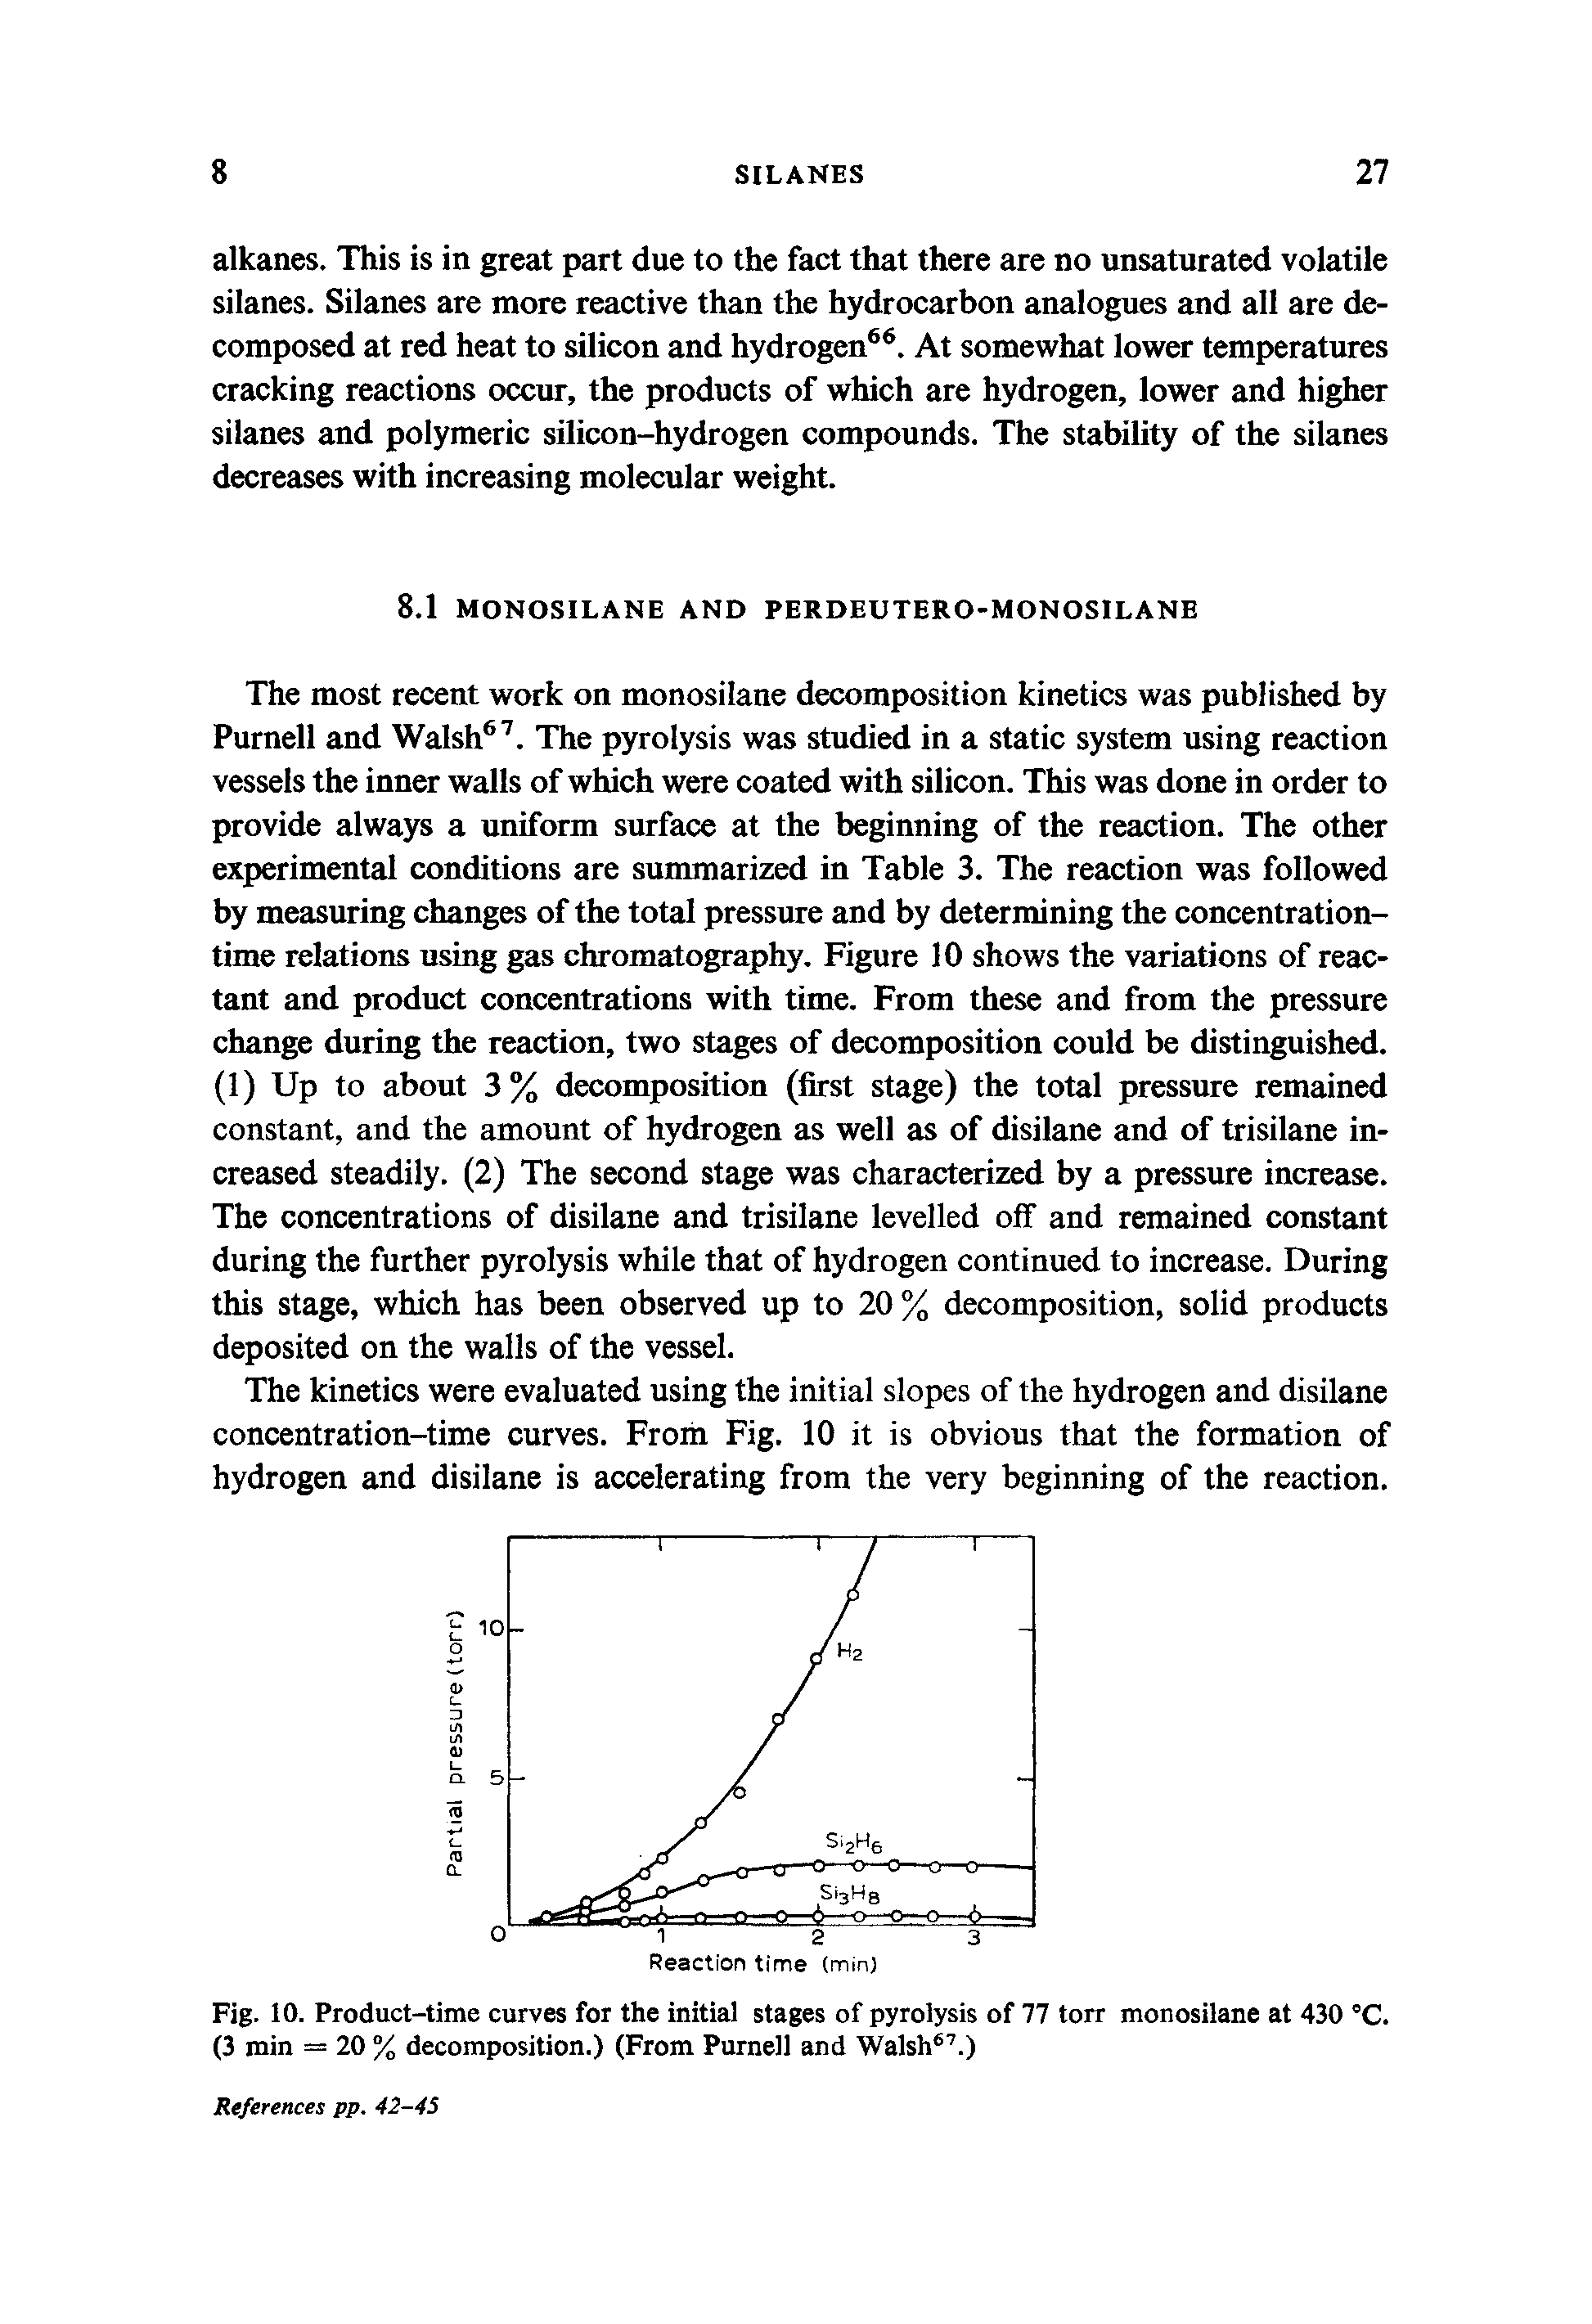 Fig. 10. Product-time curves for the initial stages of pyrolysis of 77 torr monosilane at 430 °C. (3 min = 20 % decomposition.) (From Purnell and Walsh67.)...